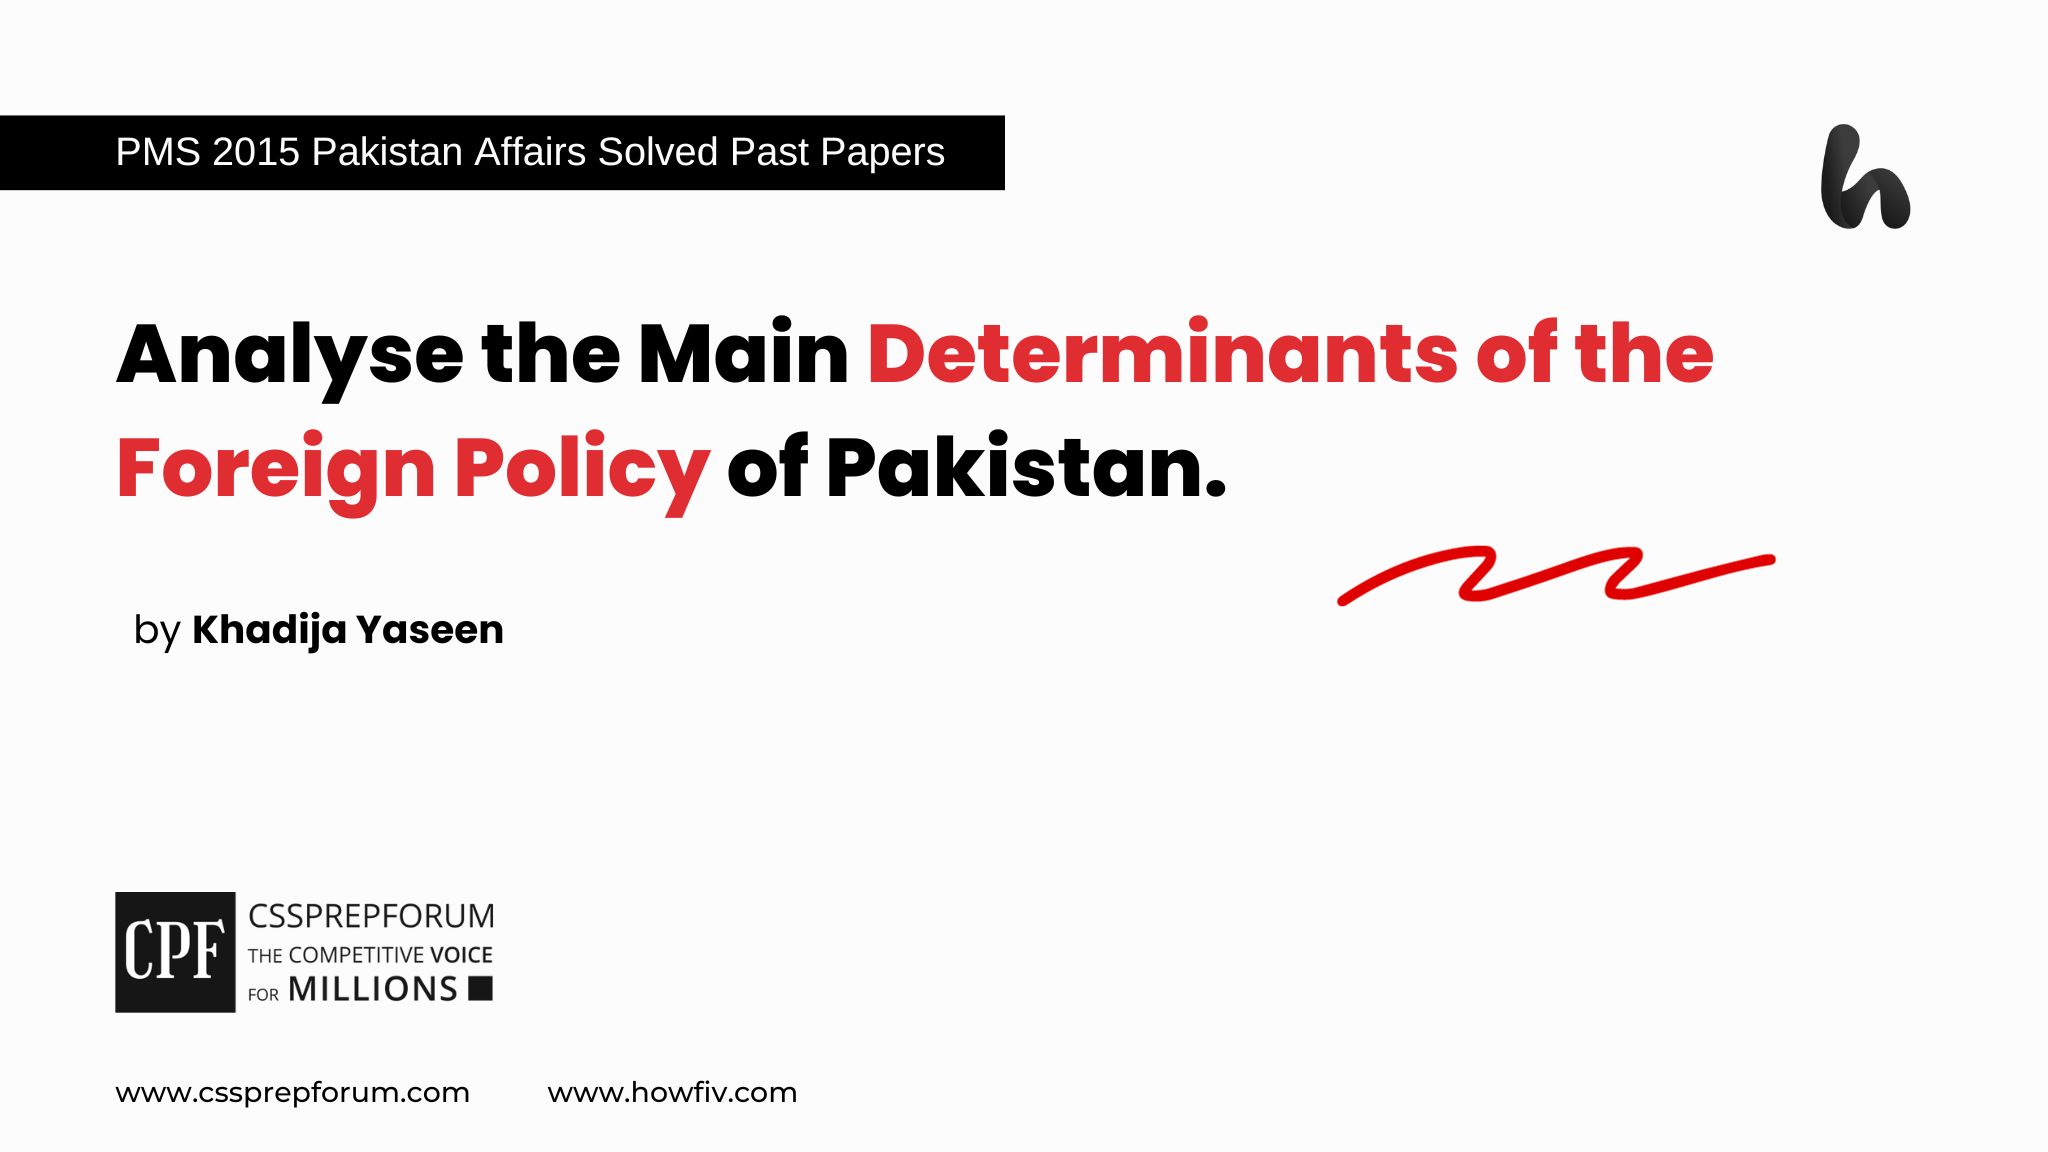 Analyse the Main Determinants of the Foreign Policy of Pakistan.